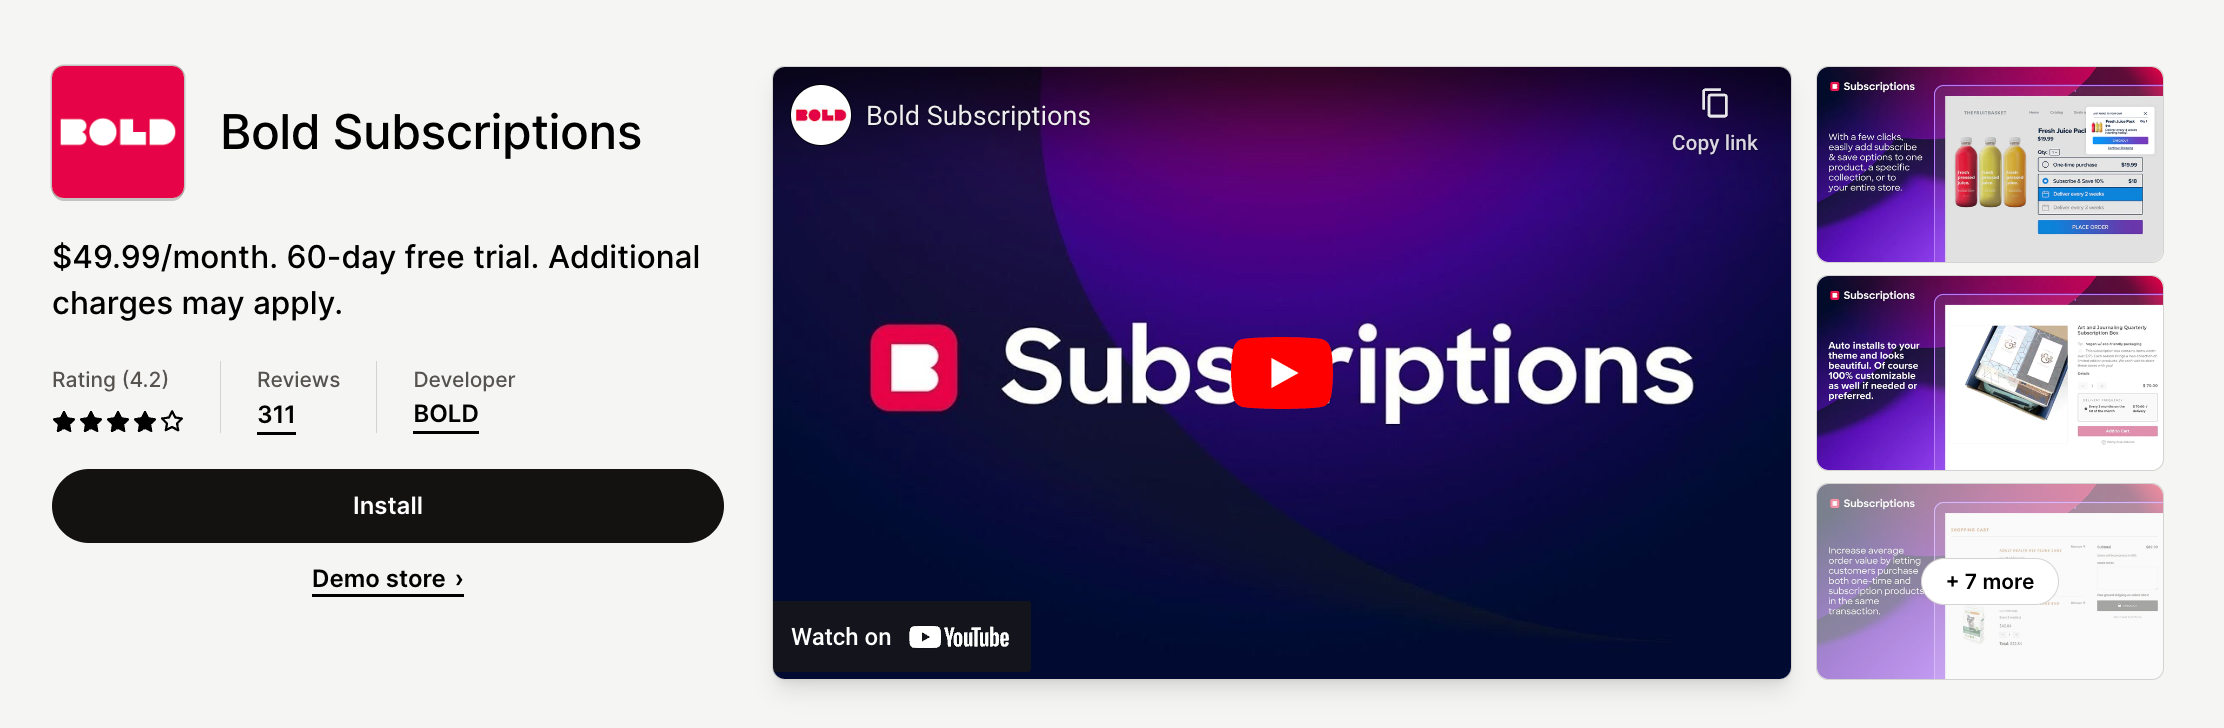 Bold Subscriptions